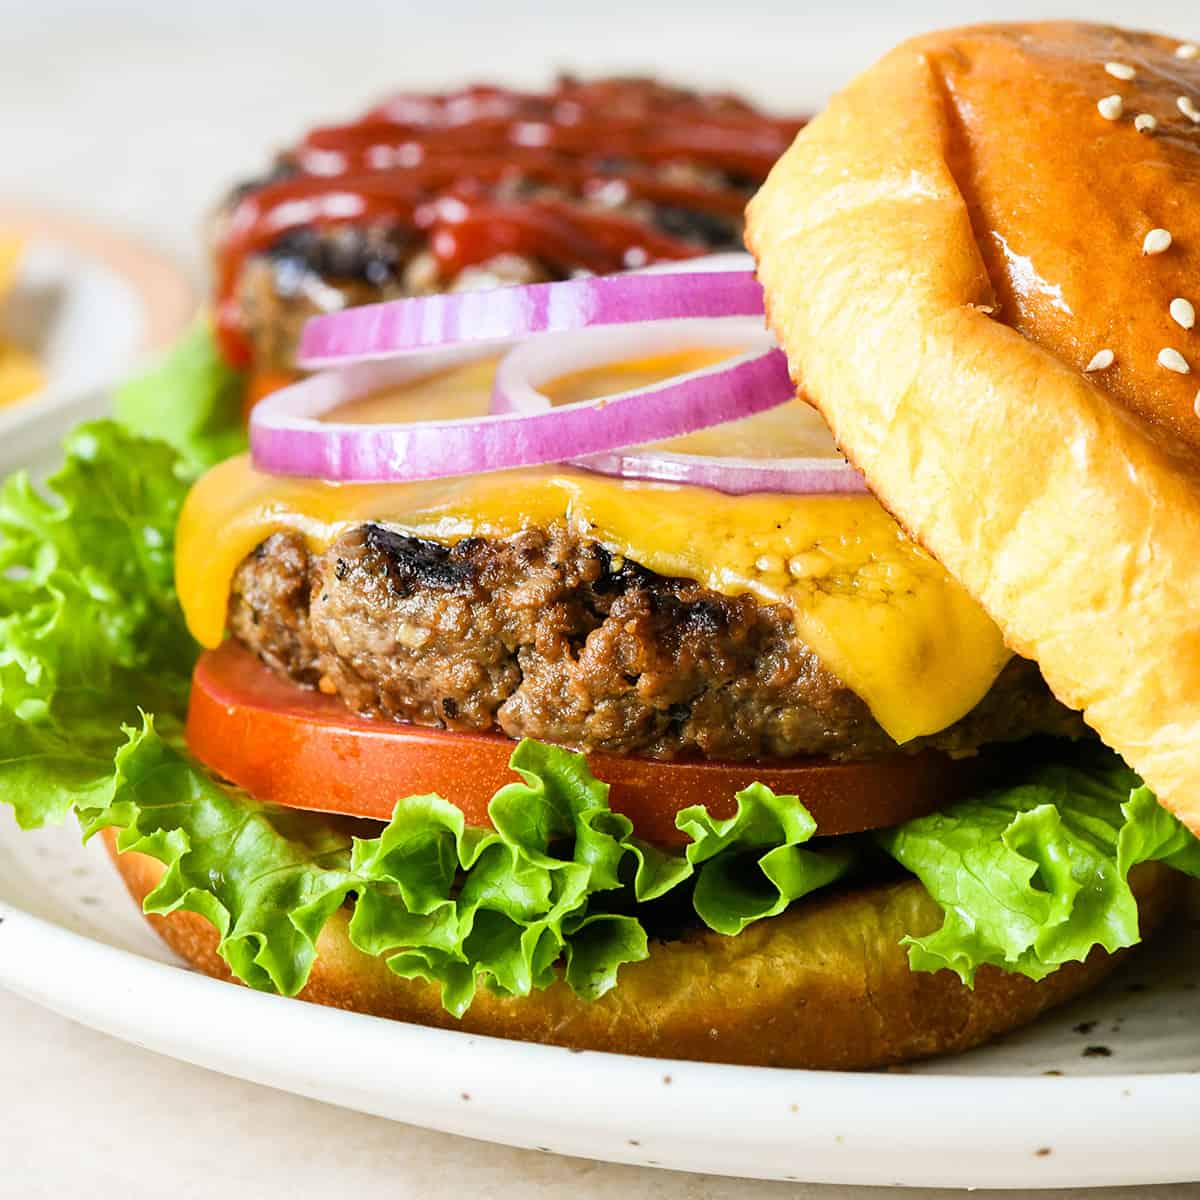 homemade hamburger patty on a bun with toppings